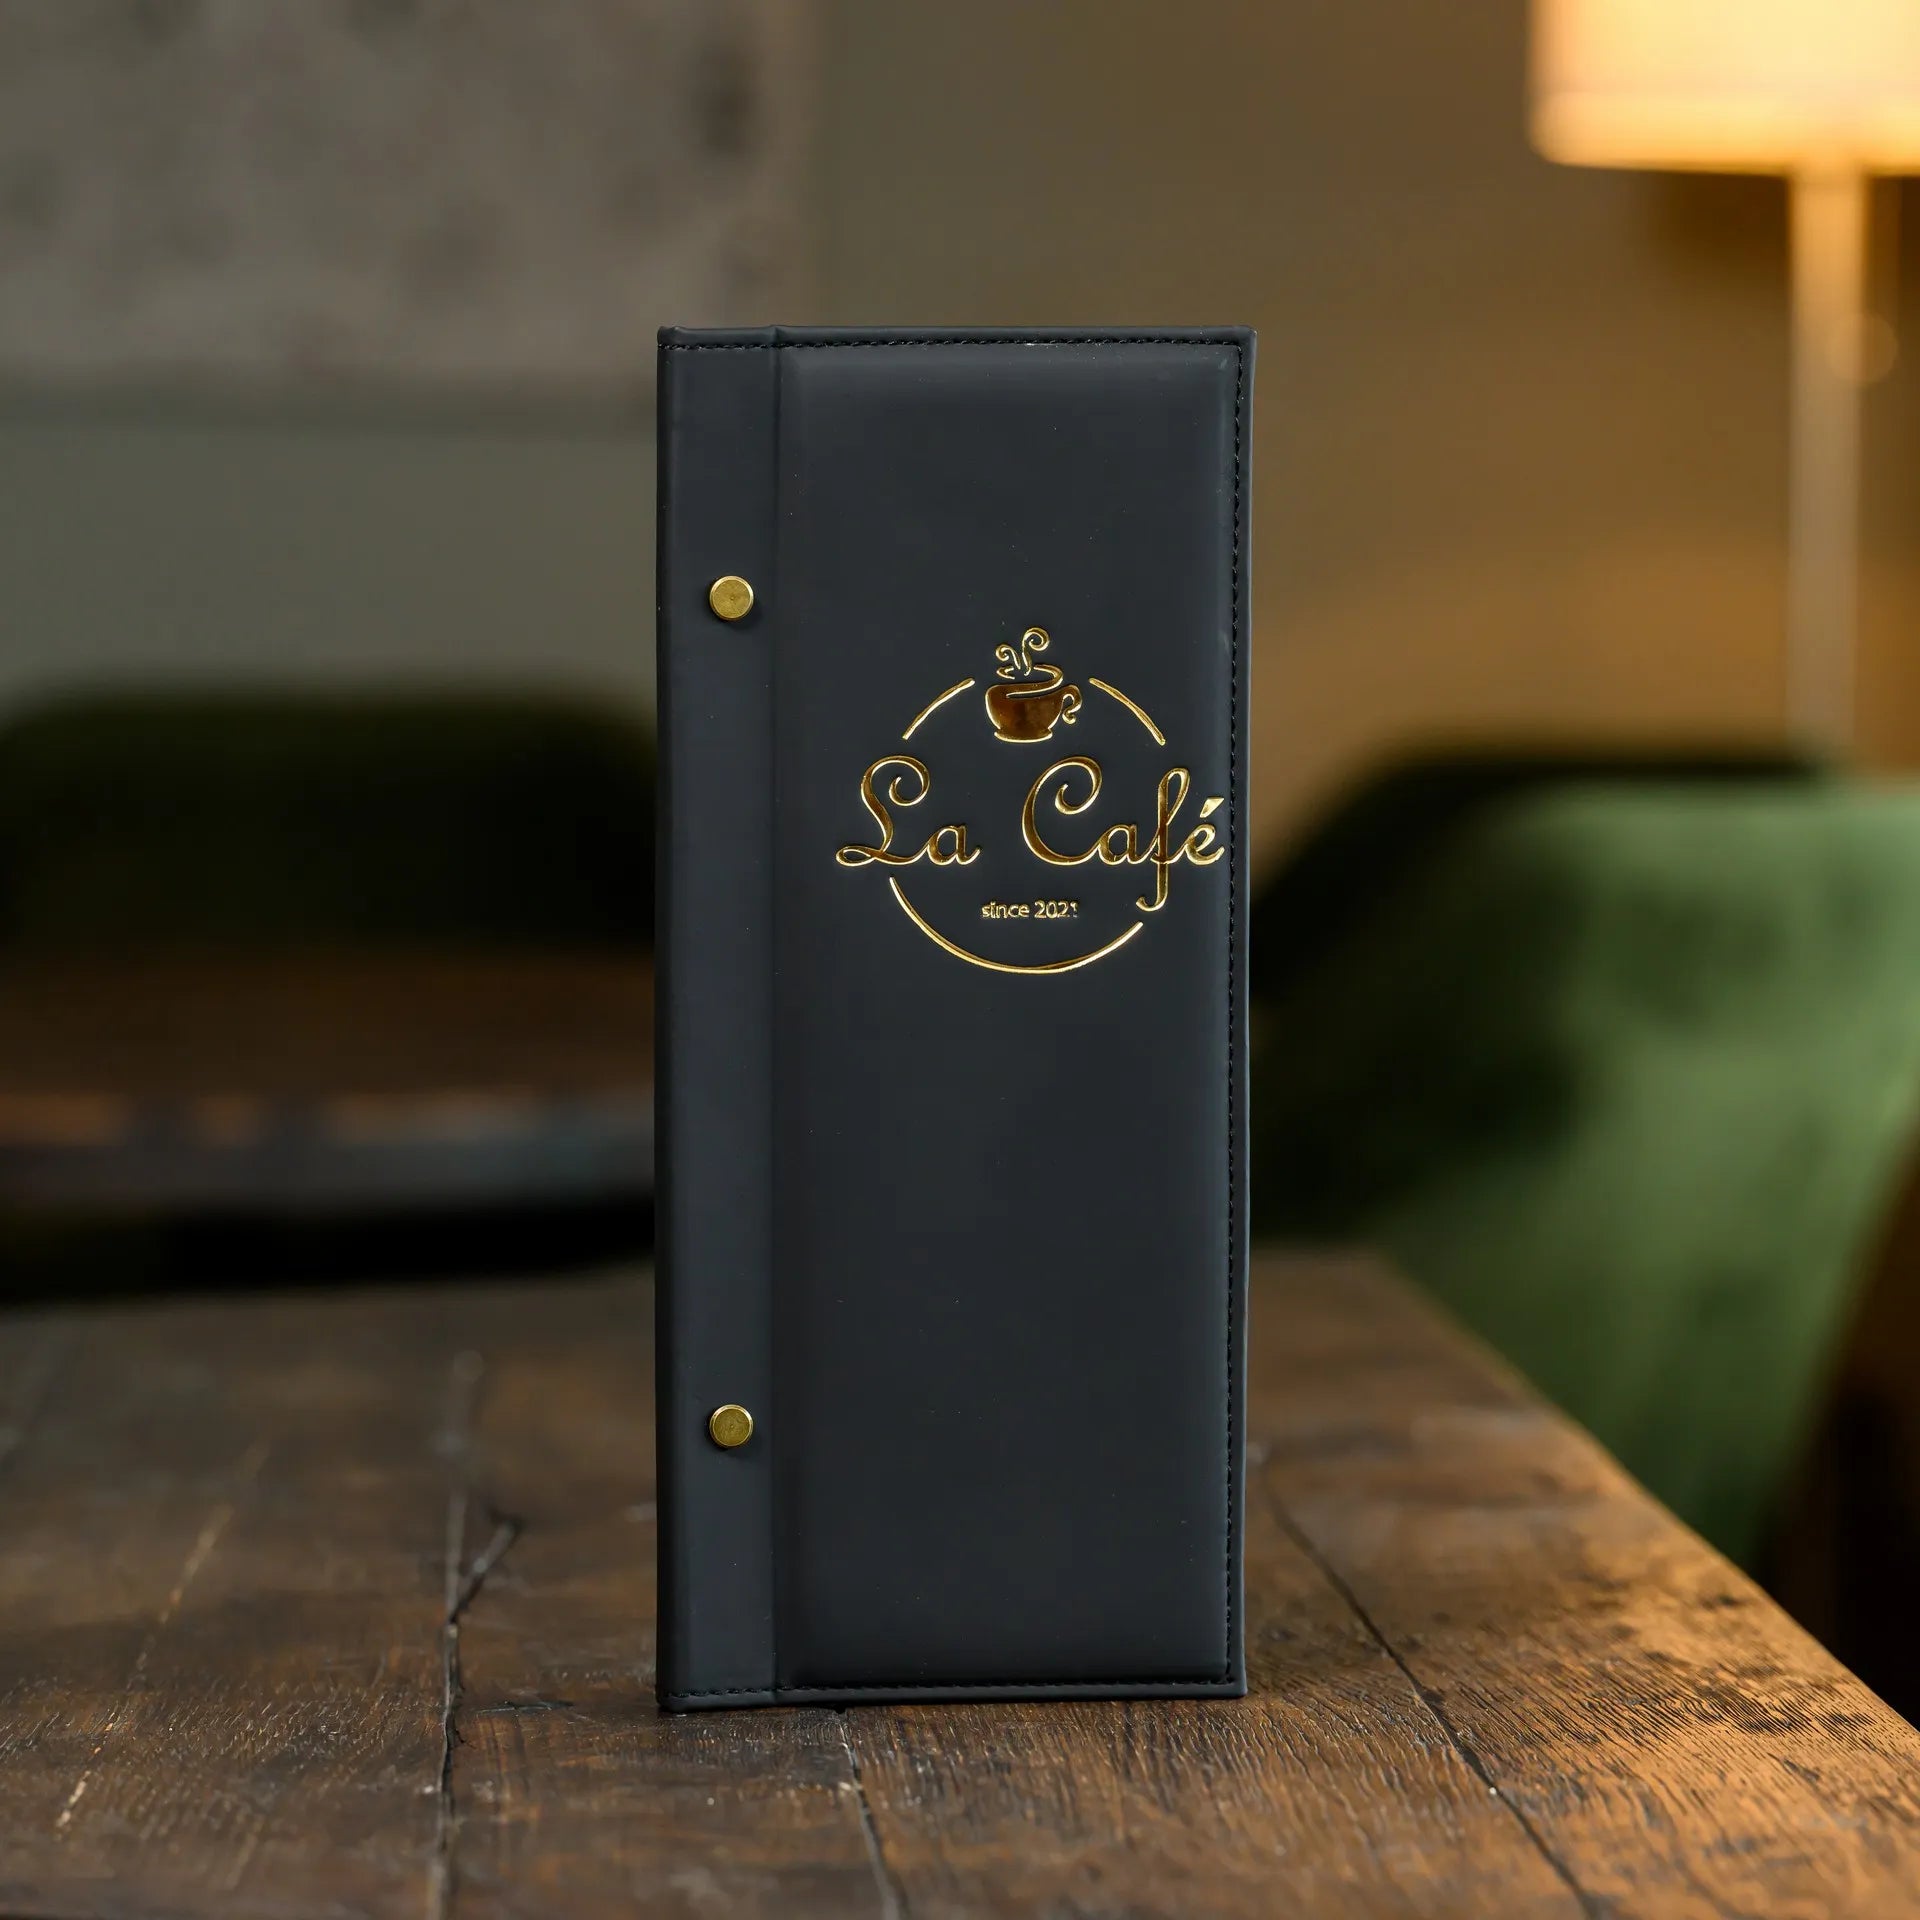 Elegant Faux Leather Menu Cover with Logo Embossing, adding a touch of sophistication to your dining establishment, impressing patrons with its refined presentation.